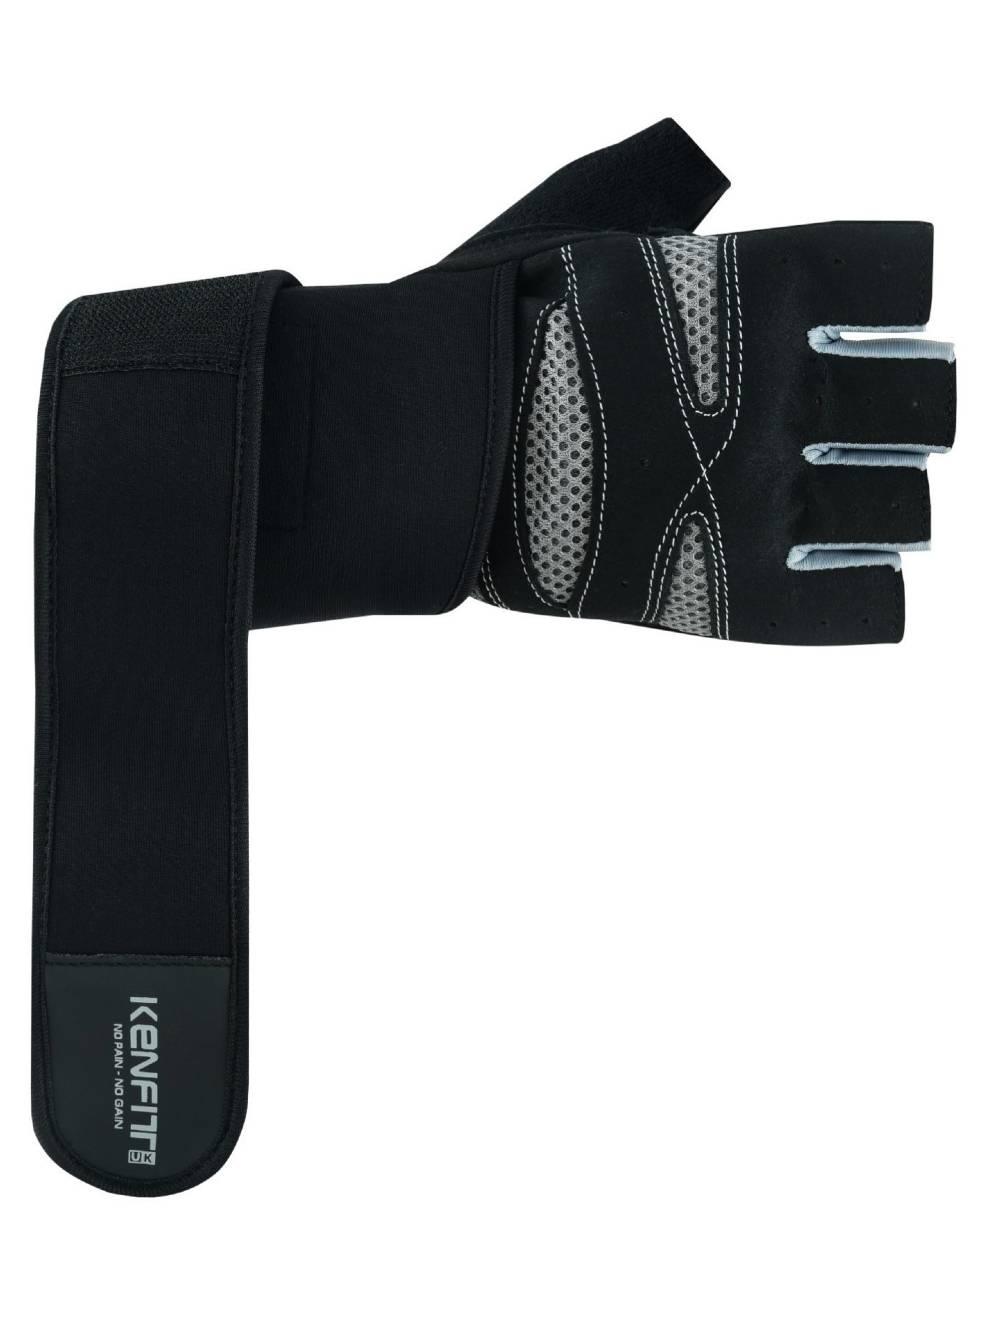 Gym Long strap Gloves Weight Lifting workout fitness bodybuilding, men women by Kenfit® UK 